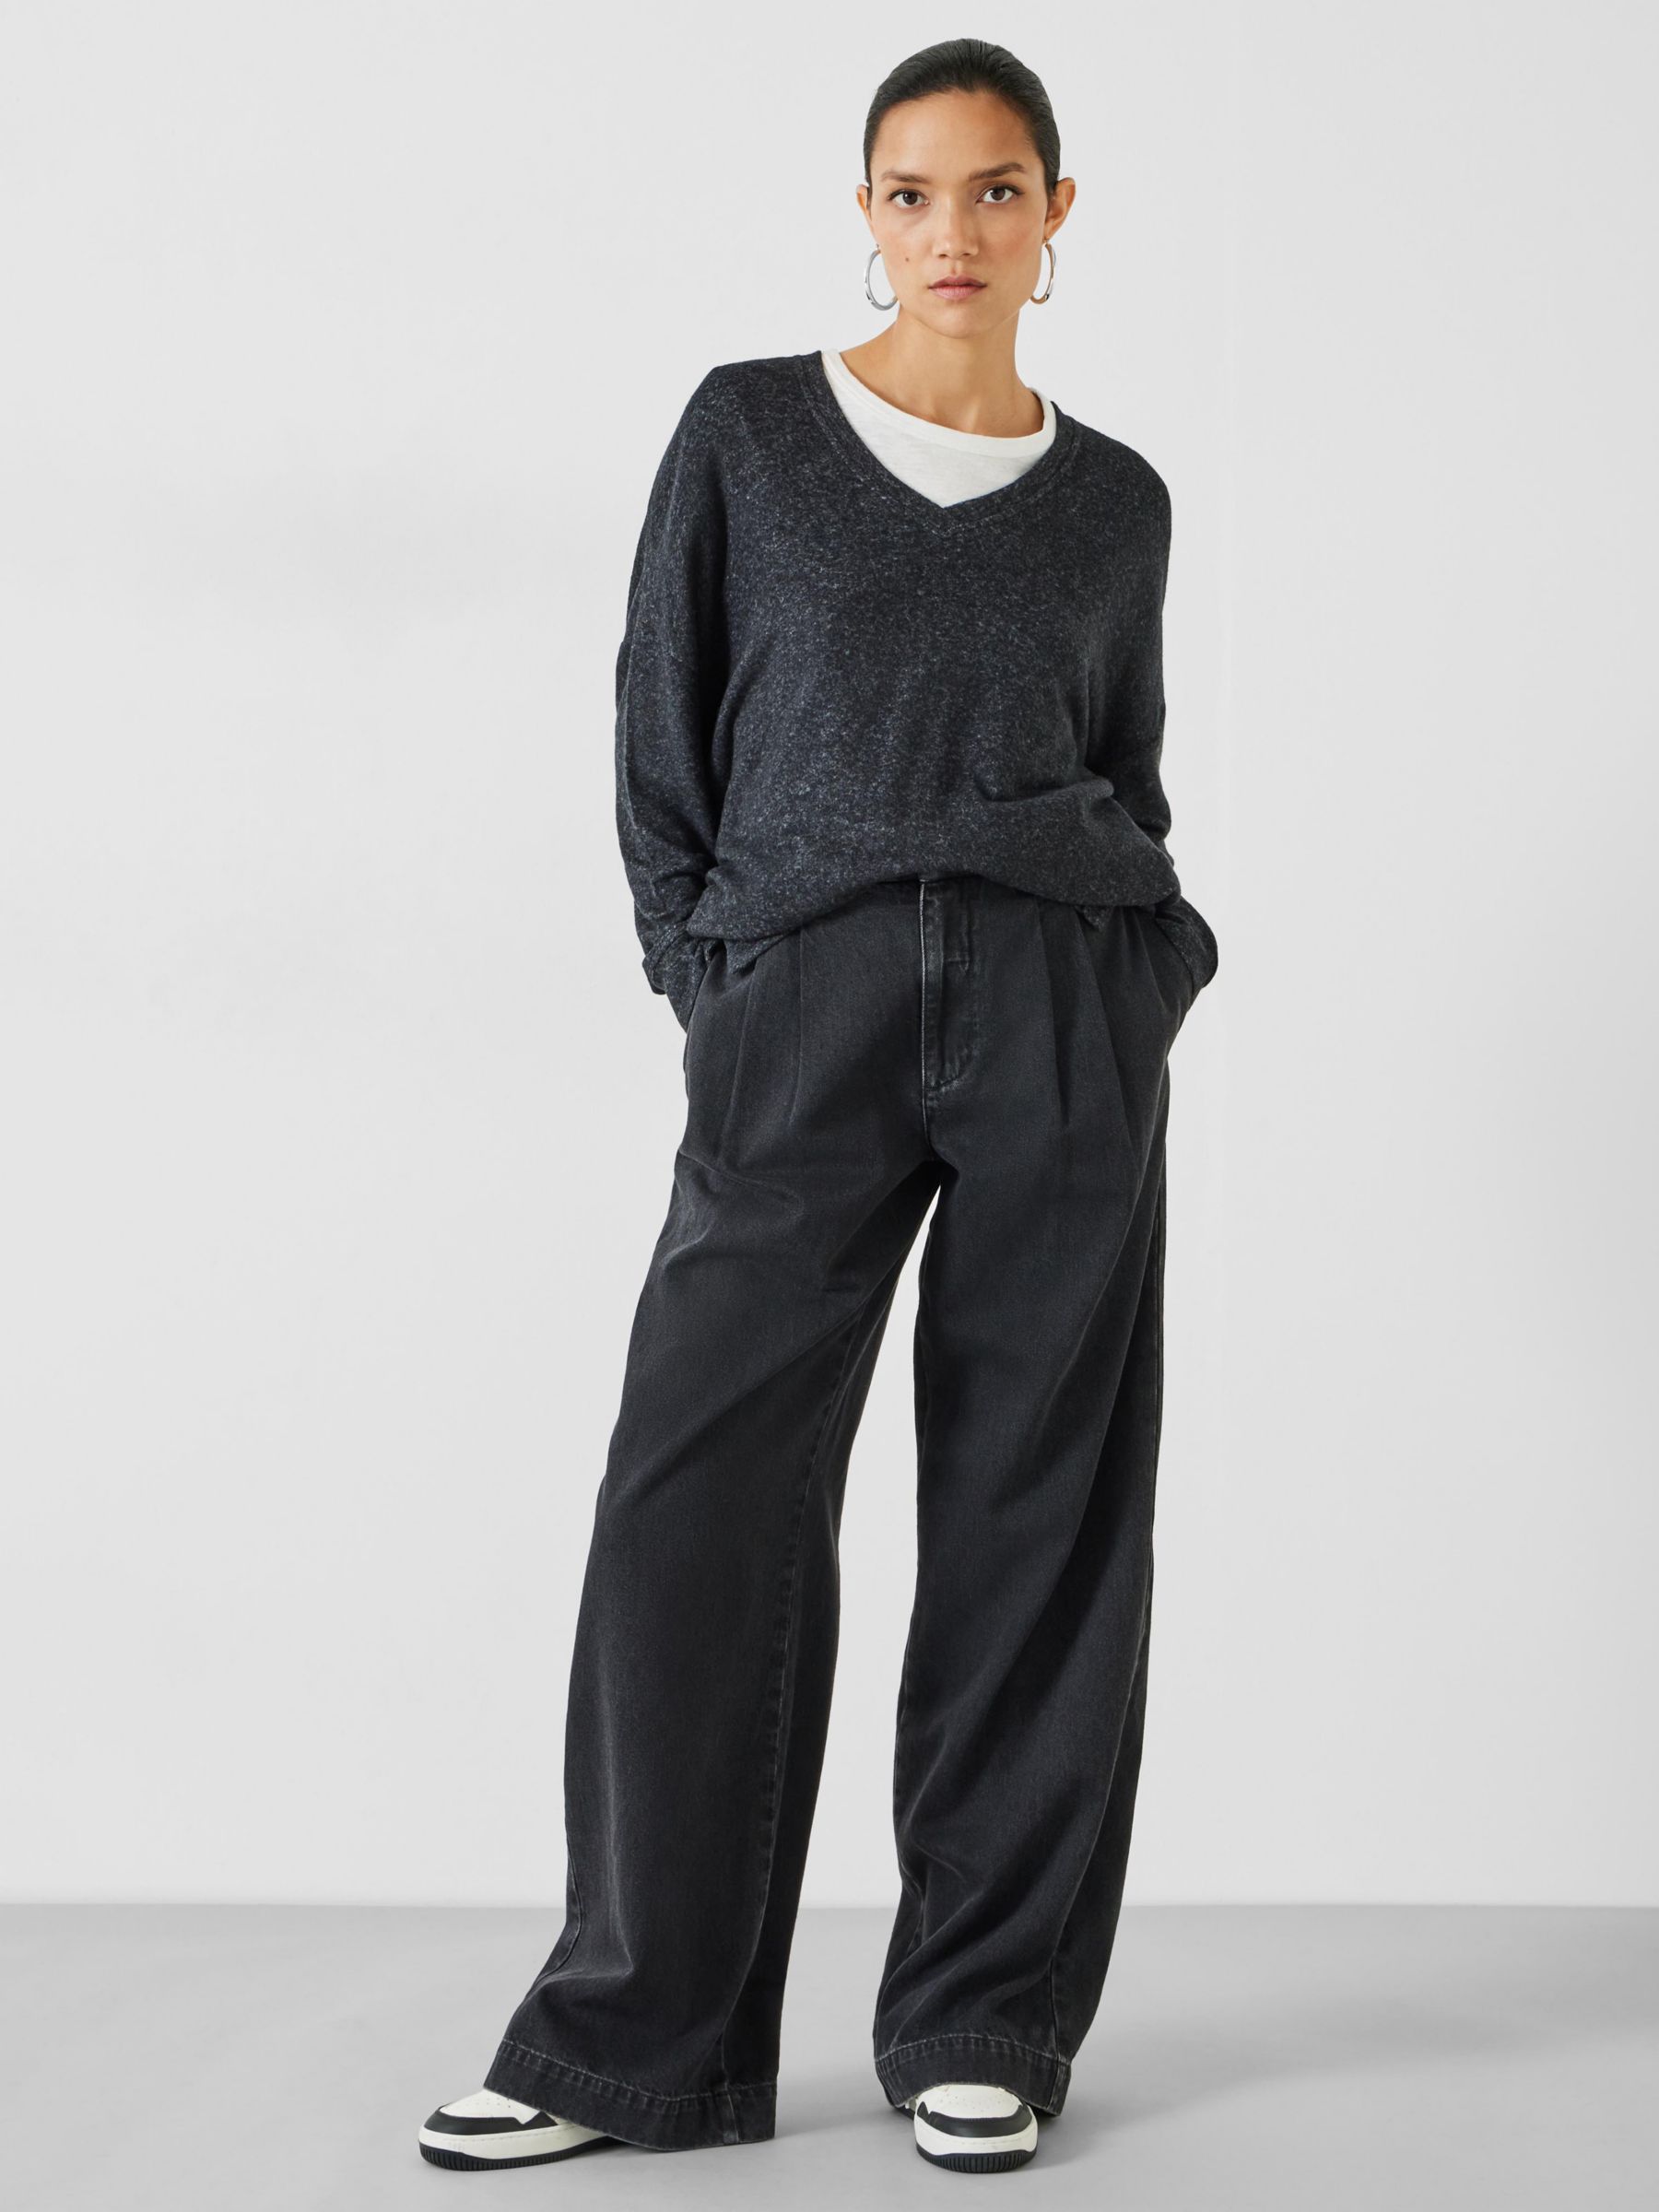 ASOS Weekend Collective Petite oversized sweatpants with logo in gray marl